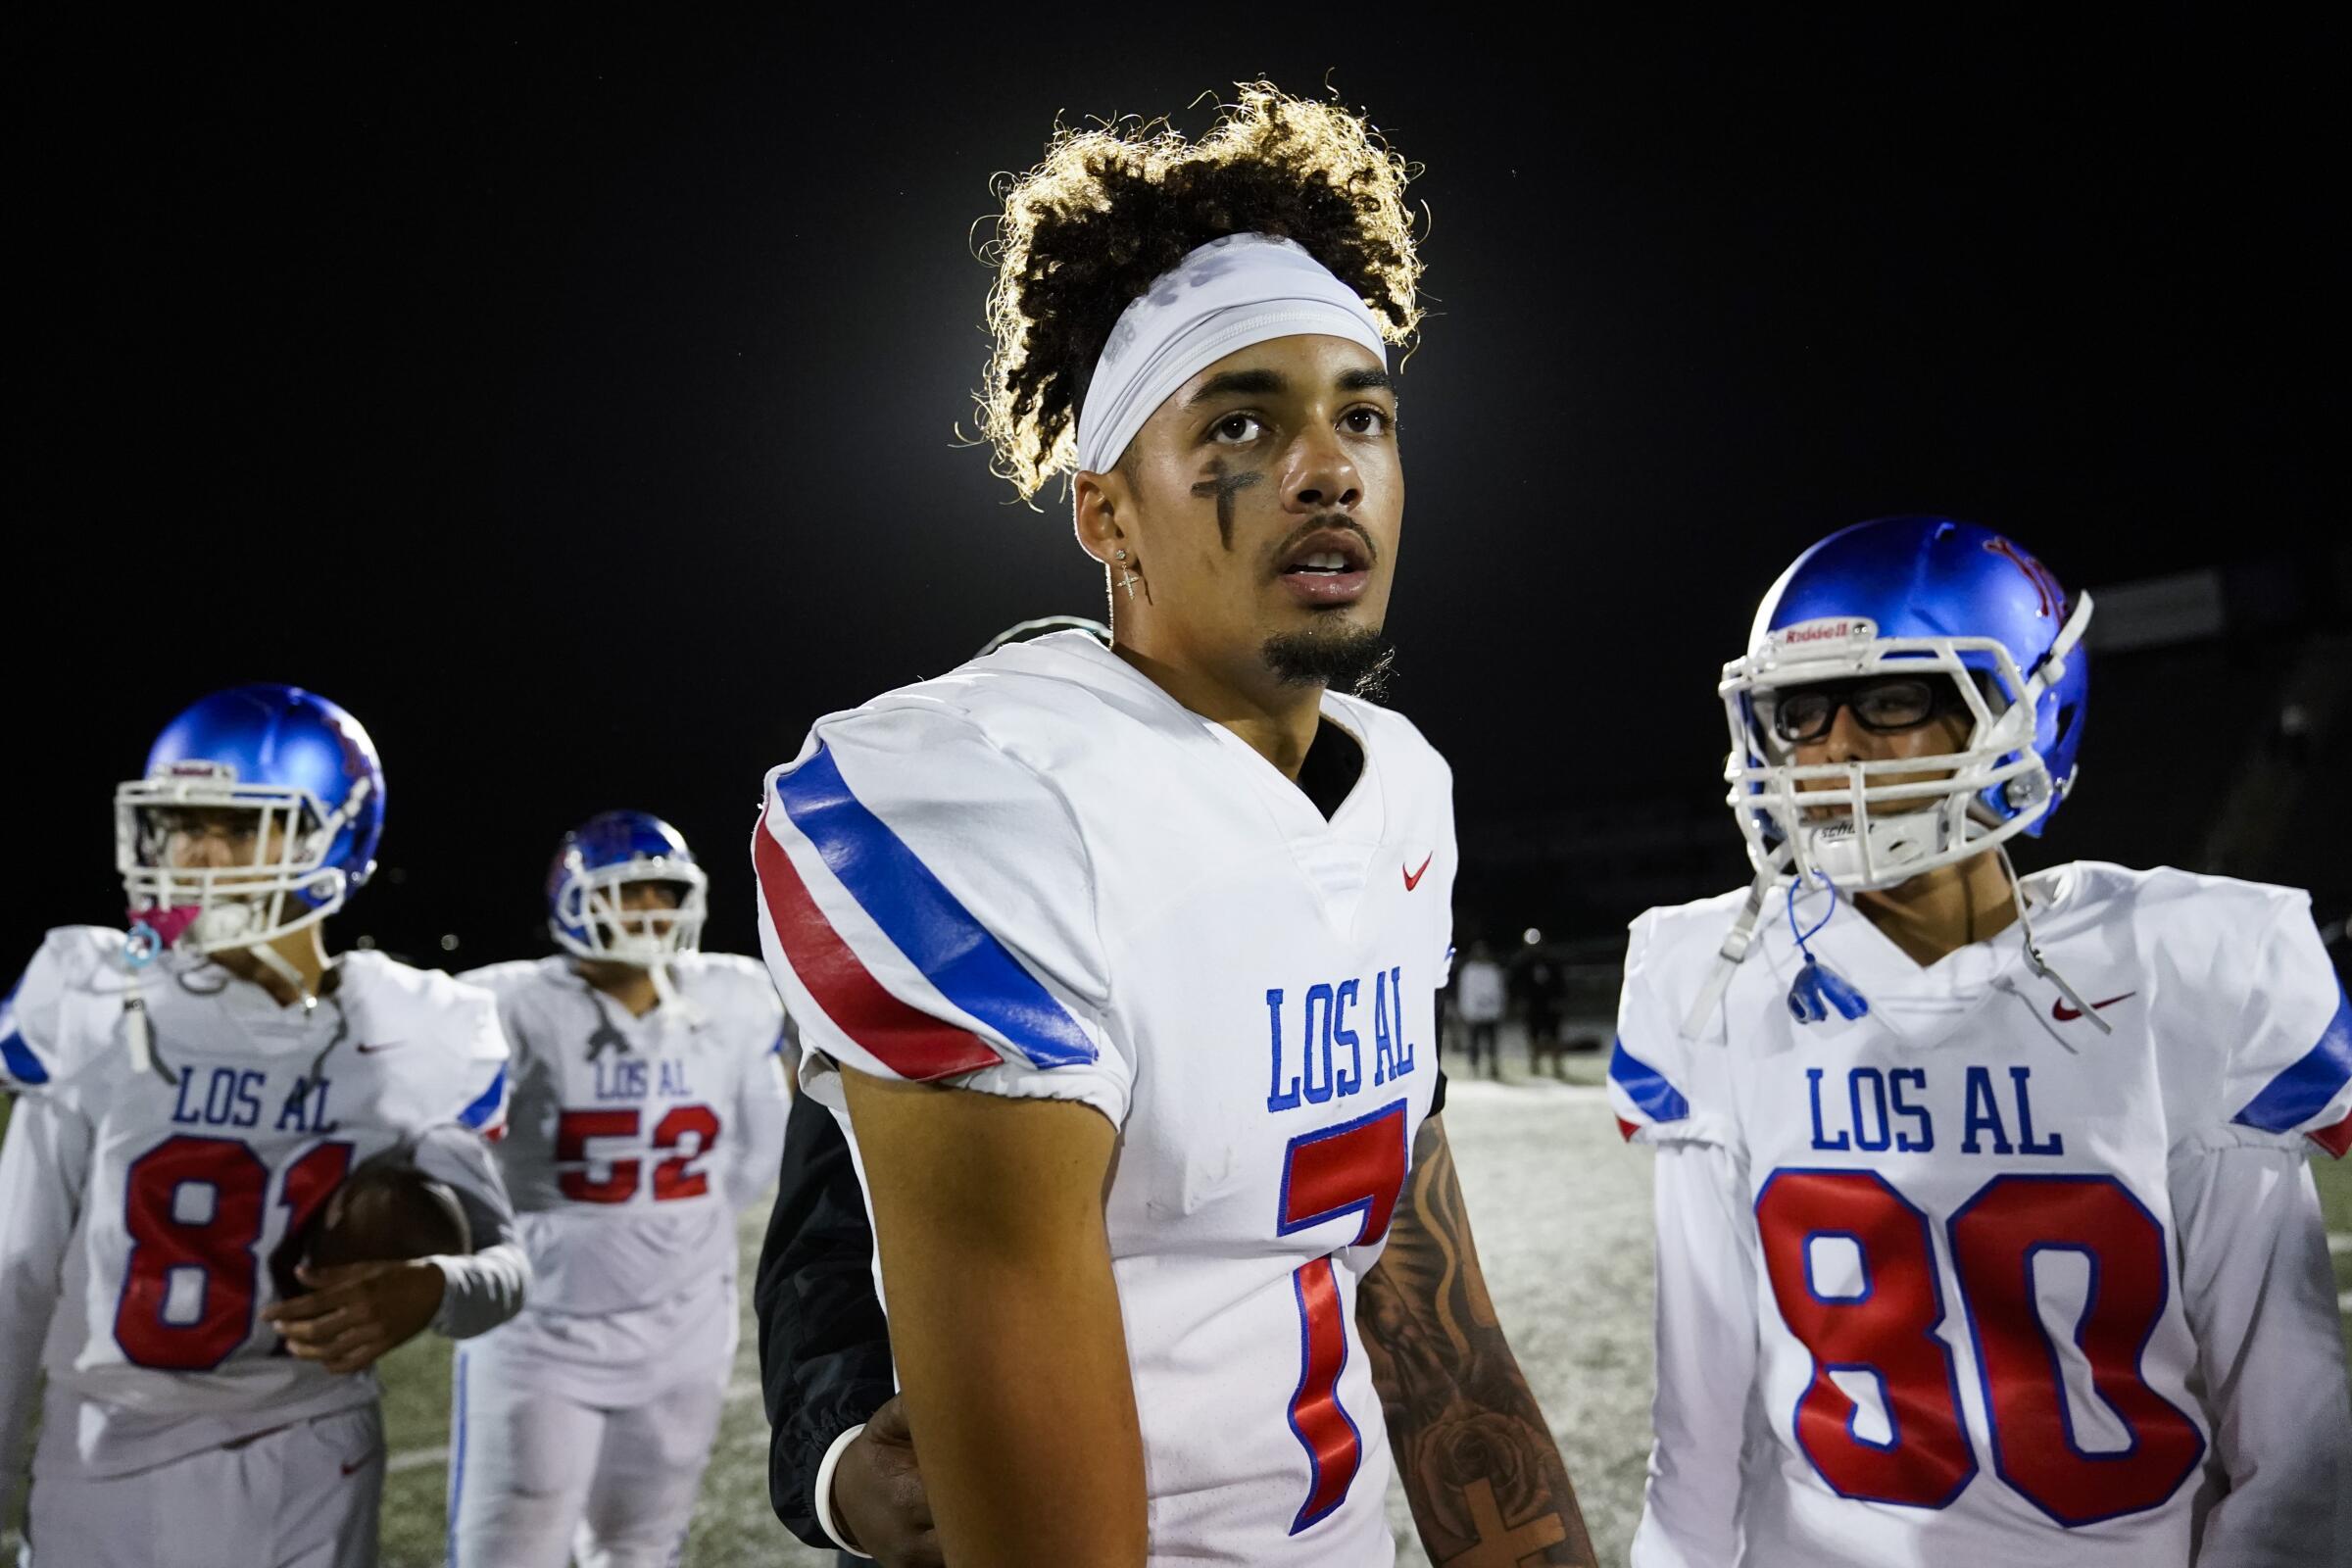 Los Alamitos High School quarterback Malachi Nelson stands on the field after a high school football game